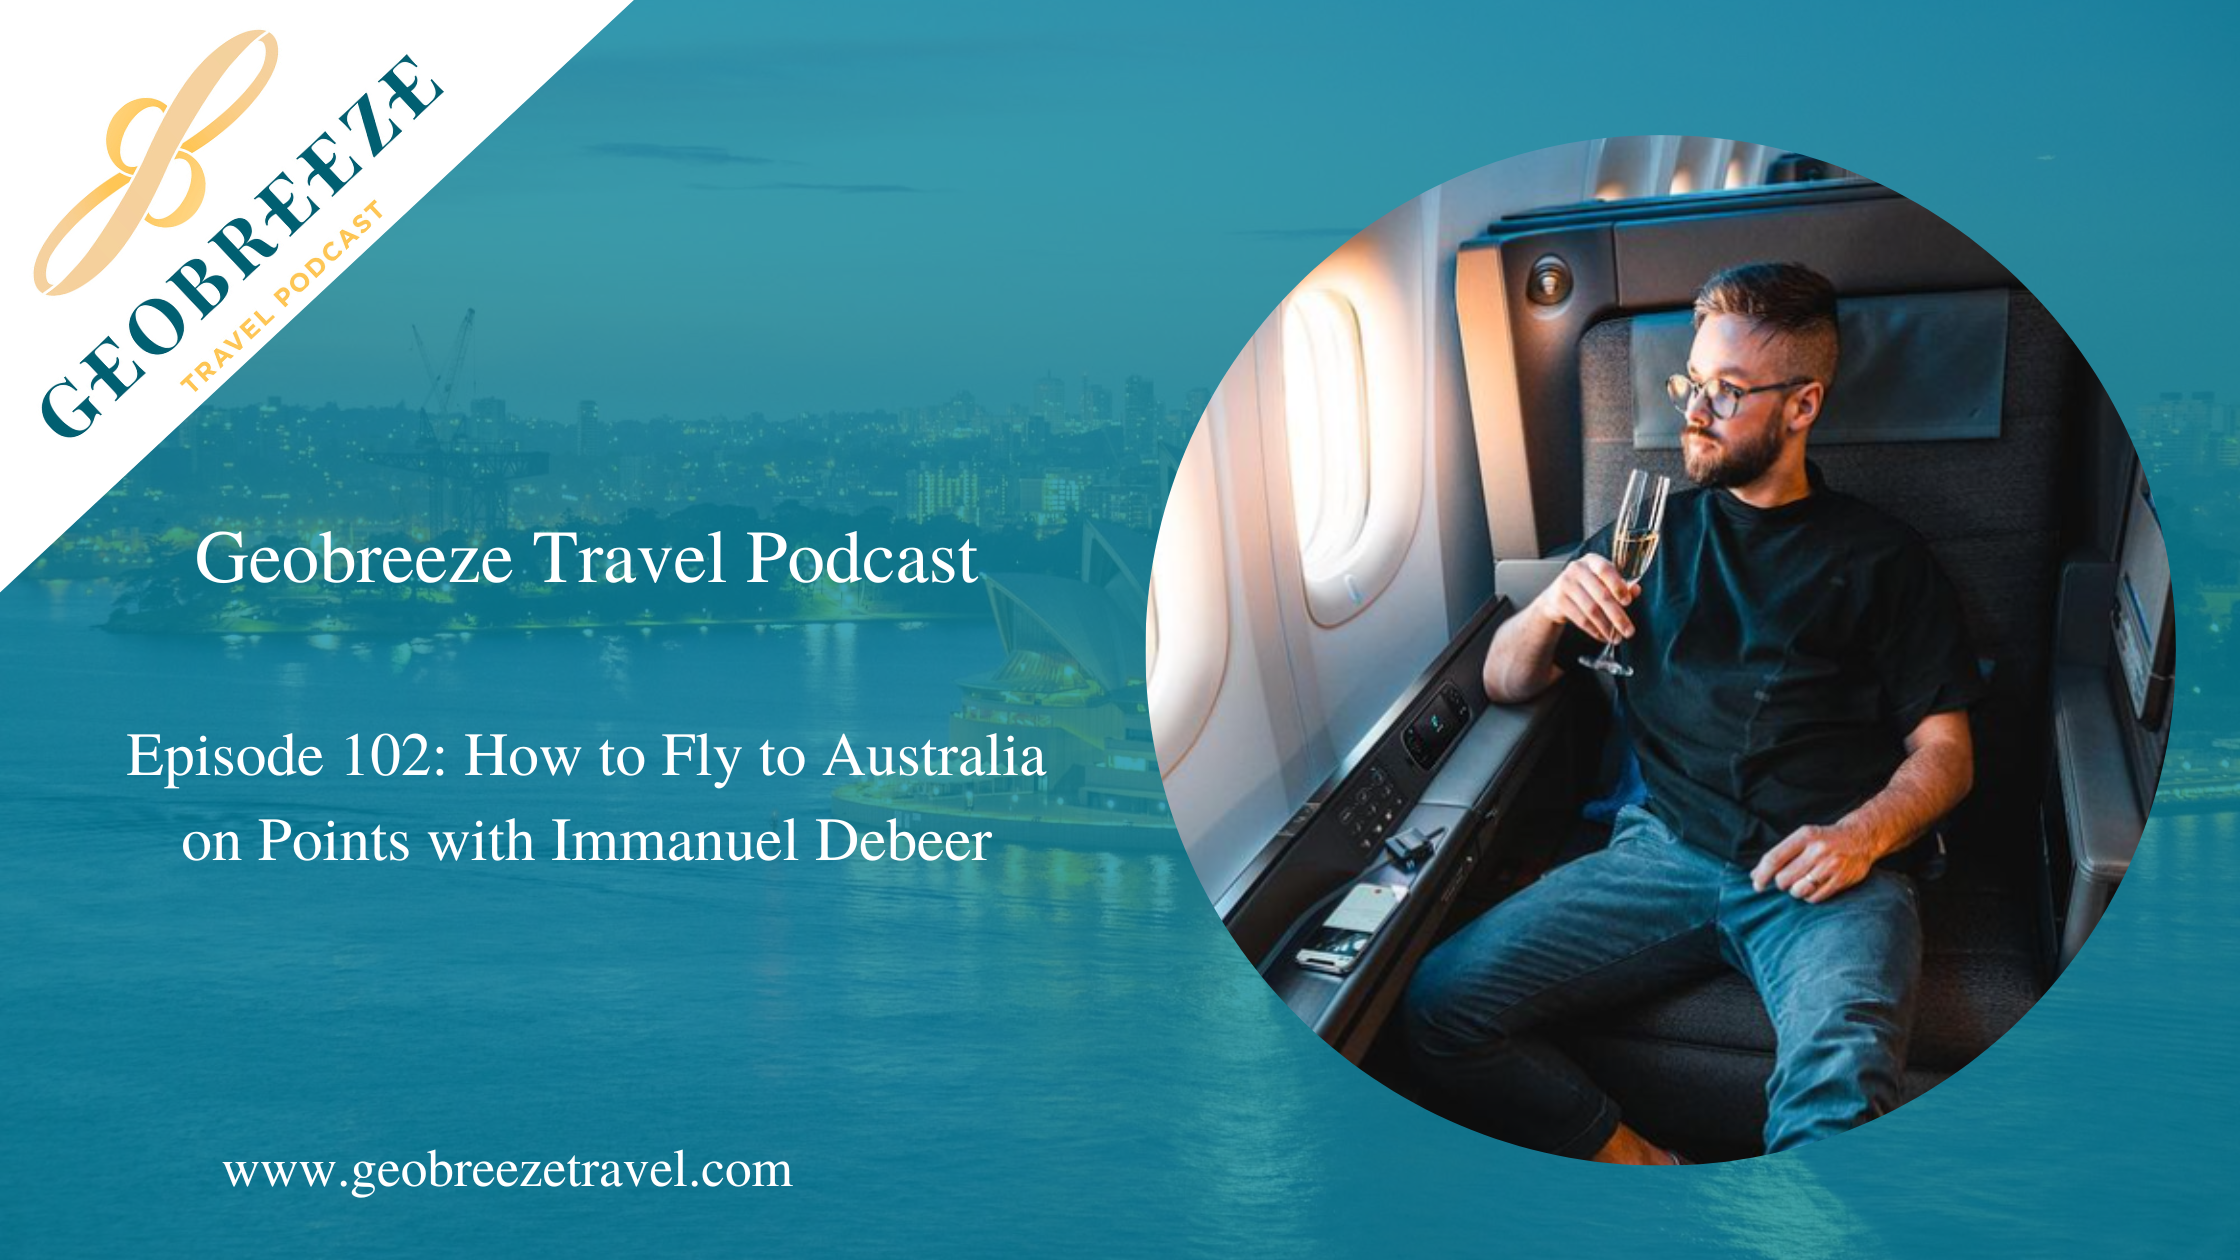 Episode 102: How to Fly to Australia on Points with Immanuel Debeer